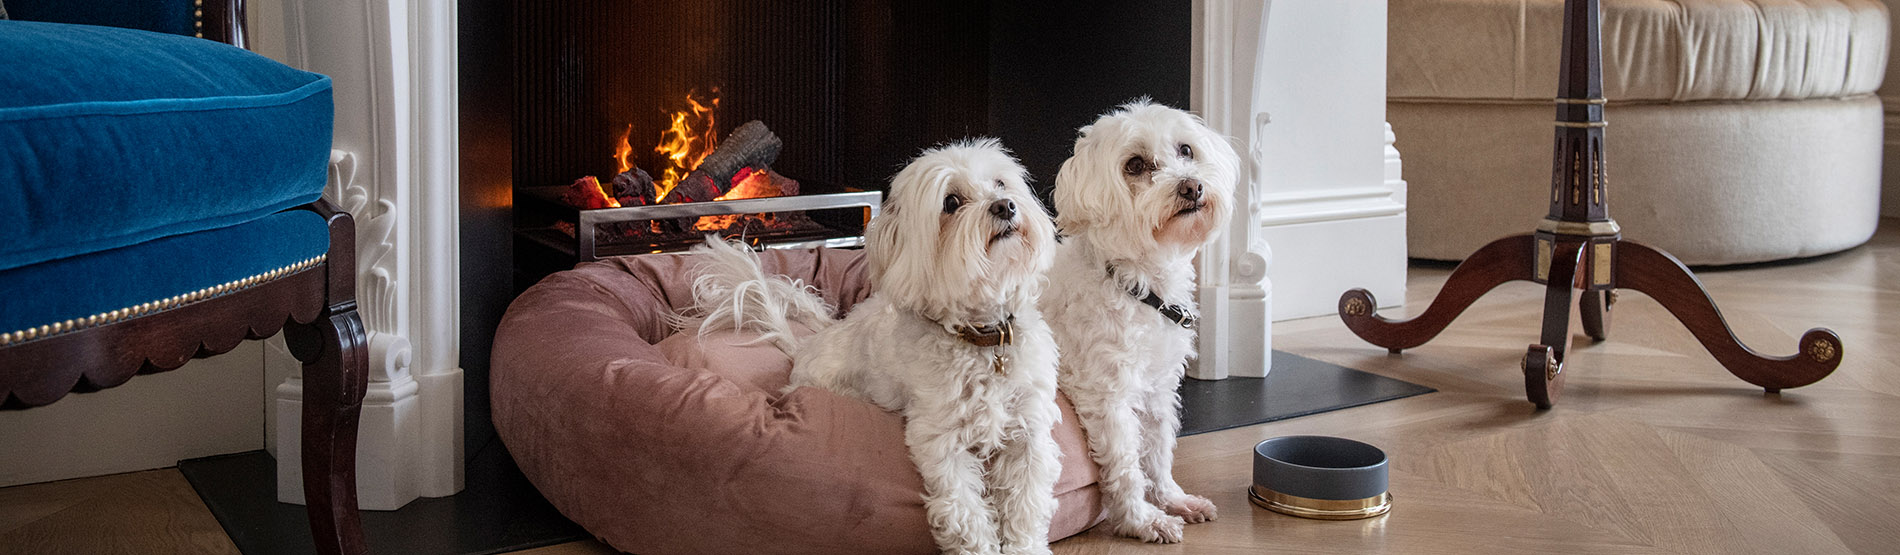 Dogs lying by the fire at the Marylebone